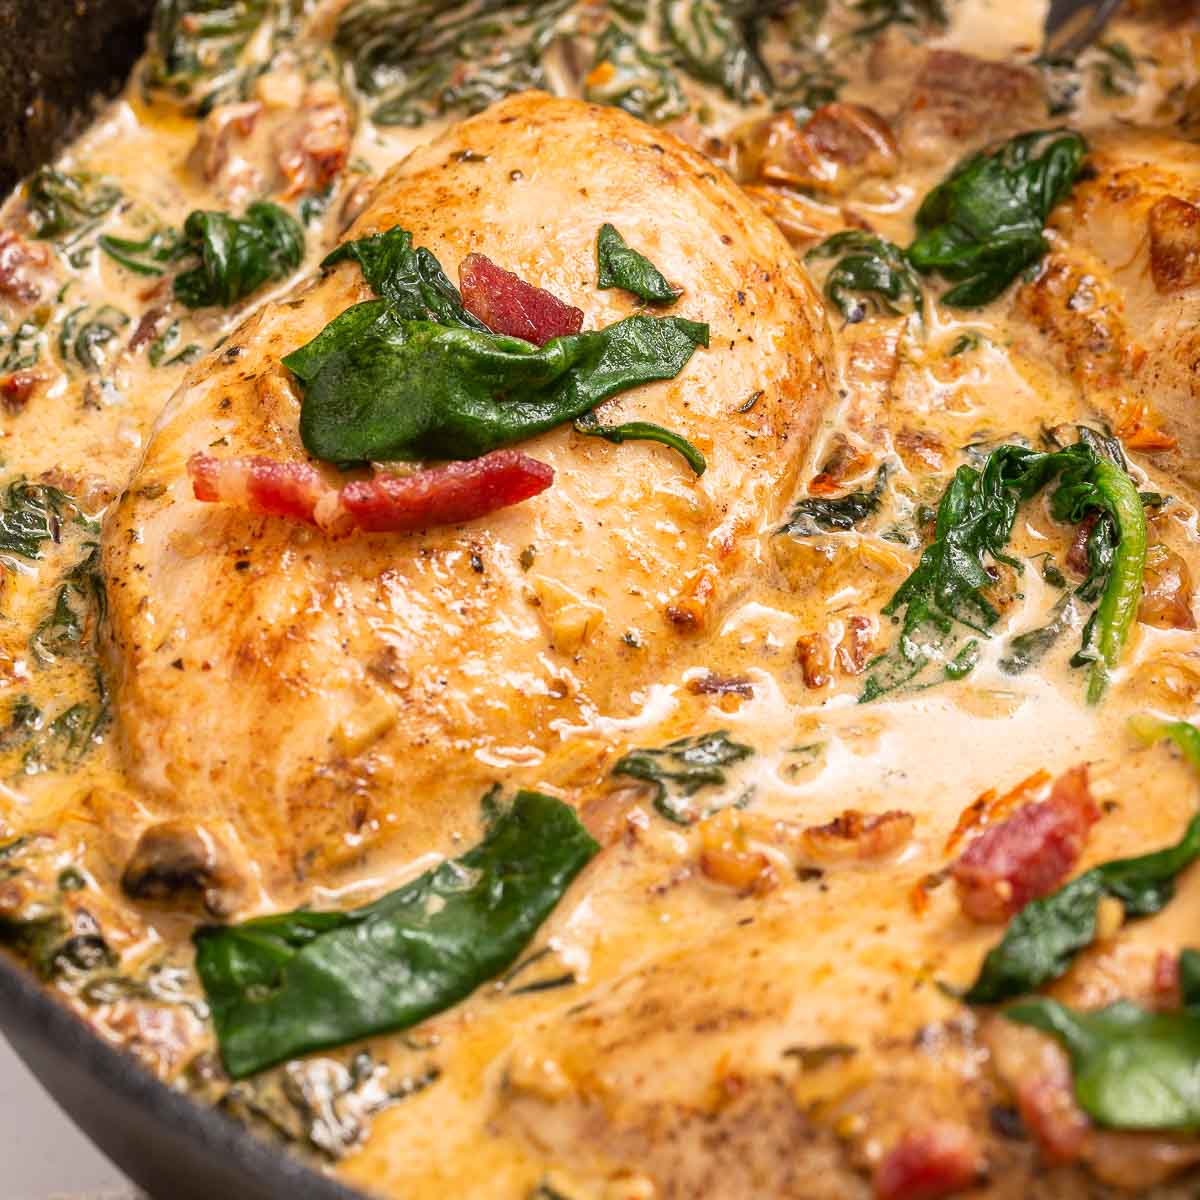 A close-up of a pan with chicken, bacon, spinach and a creamy Tuscan sun-dried tomato sauce.